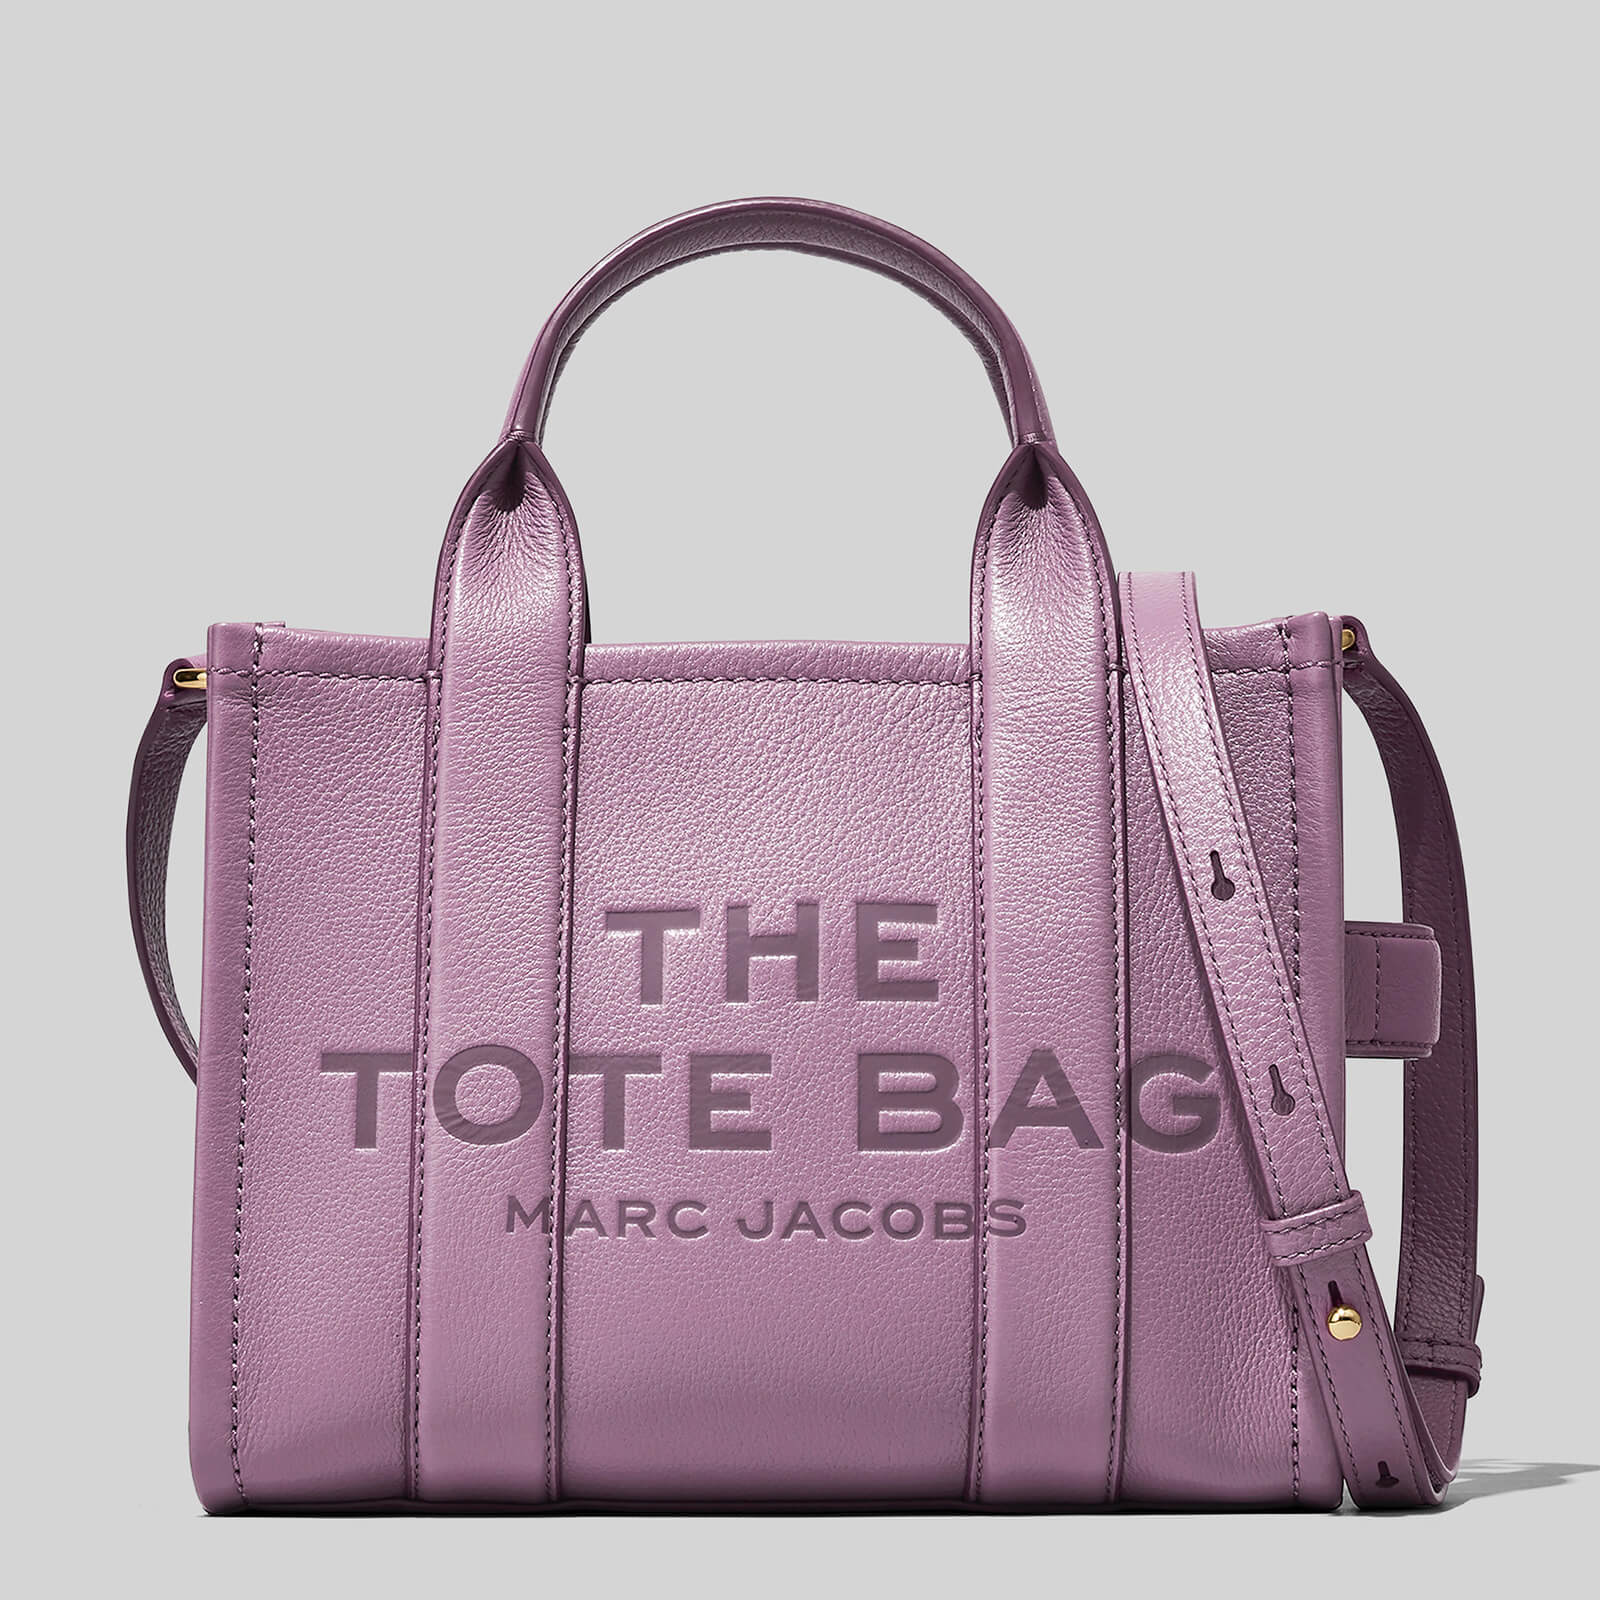 Marc Jacobs Women's The Mini Leather Tote Bag - Orchid Haze